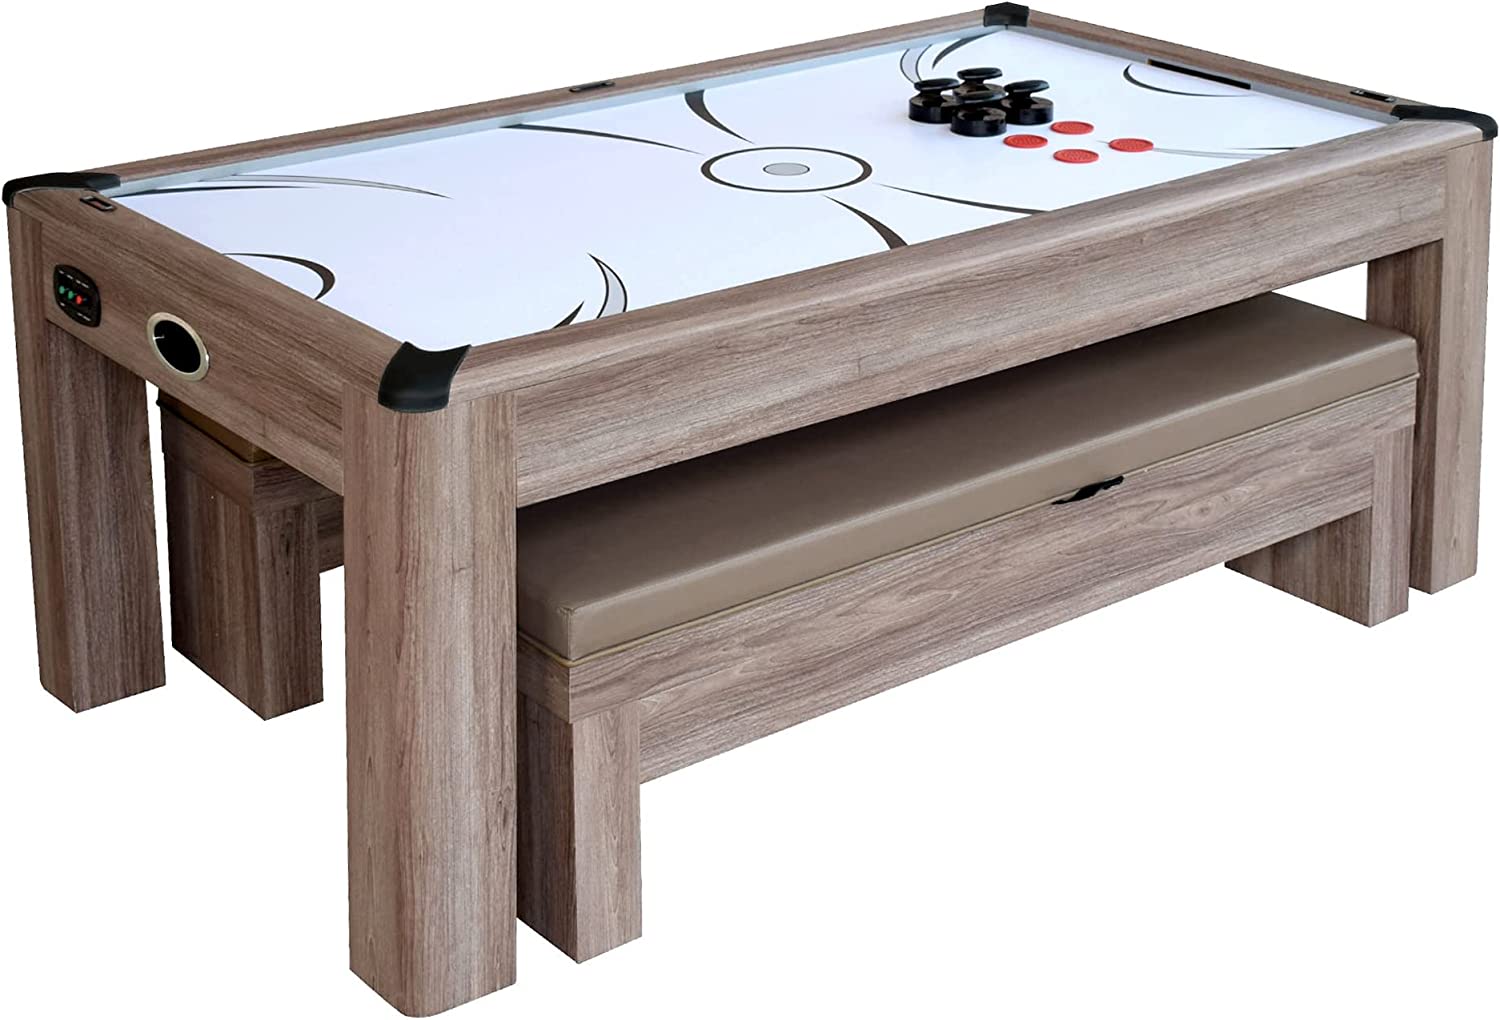 Hathaway Driftwood 7-ft Air Hockey Table Tennis Combination with Dining Top, Two Storage Benches, Free Accessories